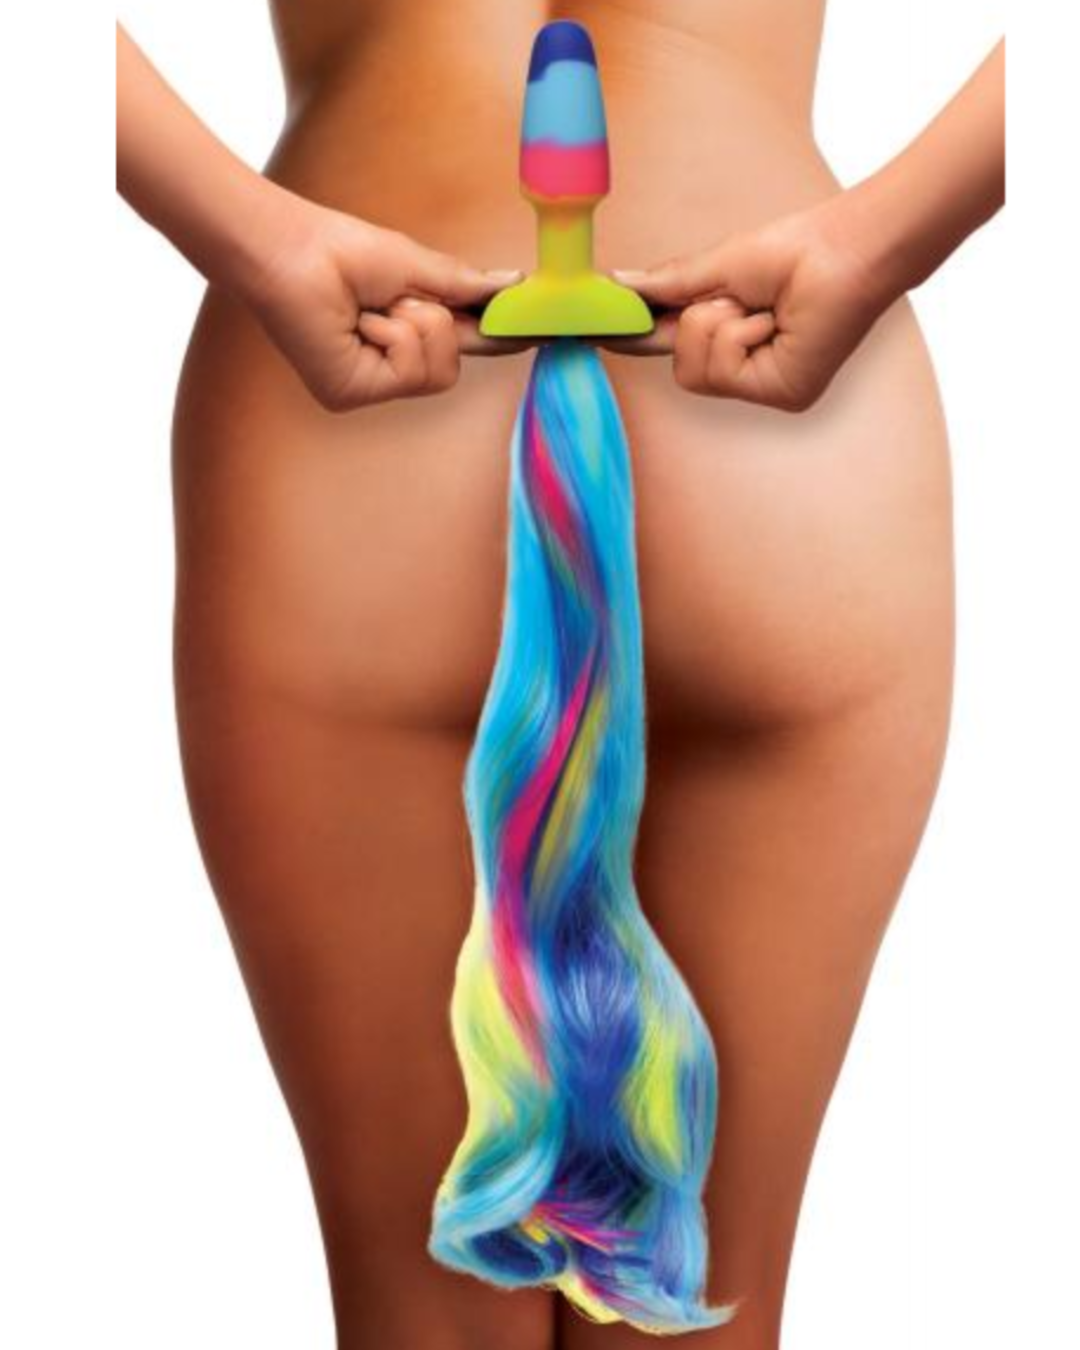 Unicorn Tail with Anal plug model holding behind back 